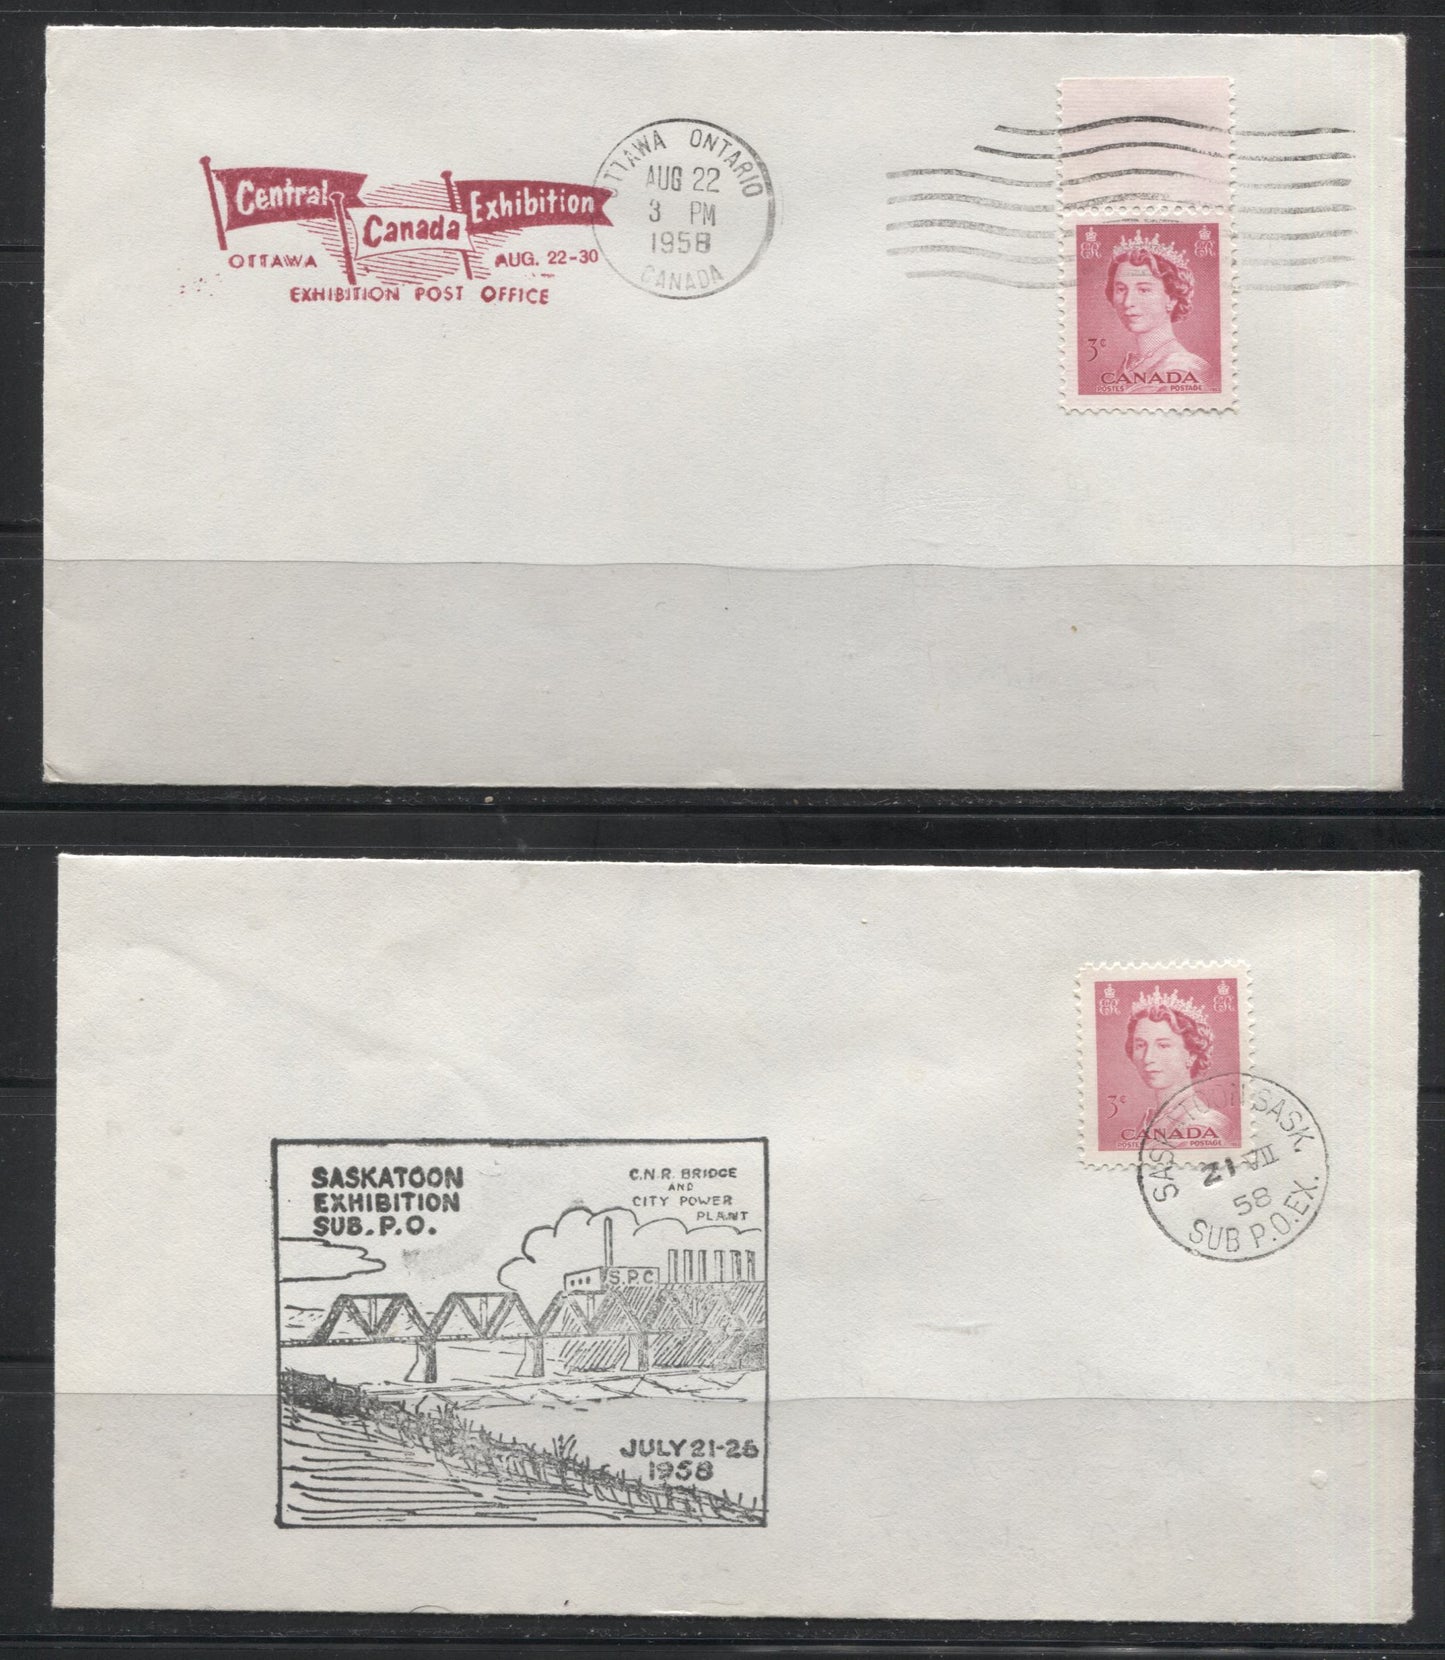 Lot 177 Canada #327 3c Cerise Karsh Issue, A Group of 4 Covers With Exhibiton Cachets